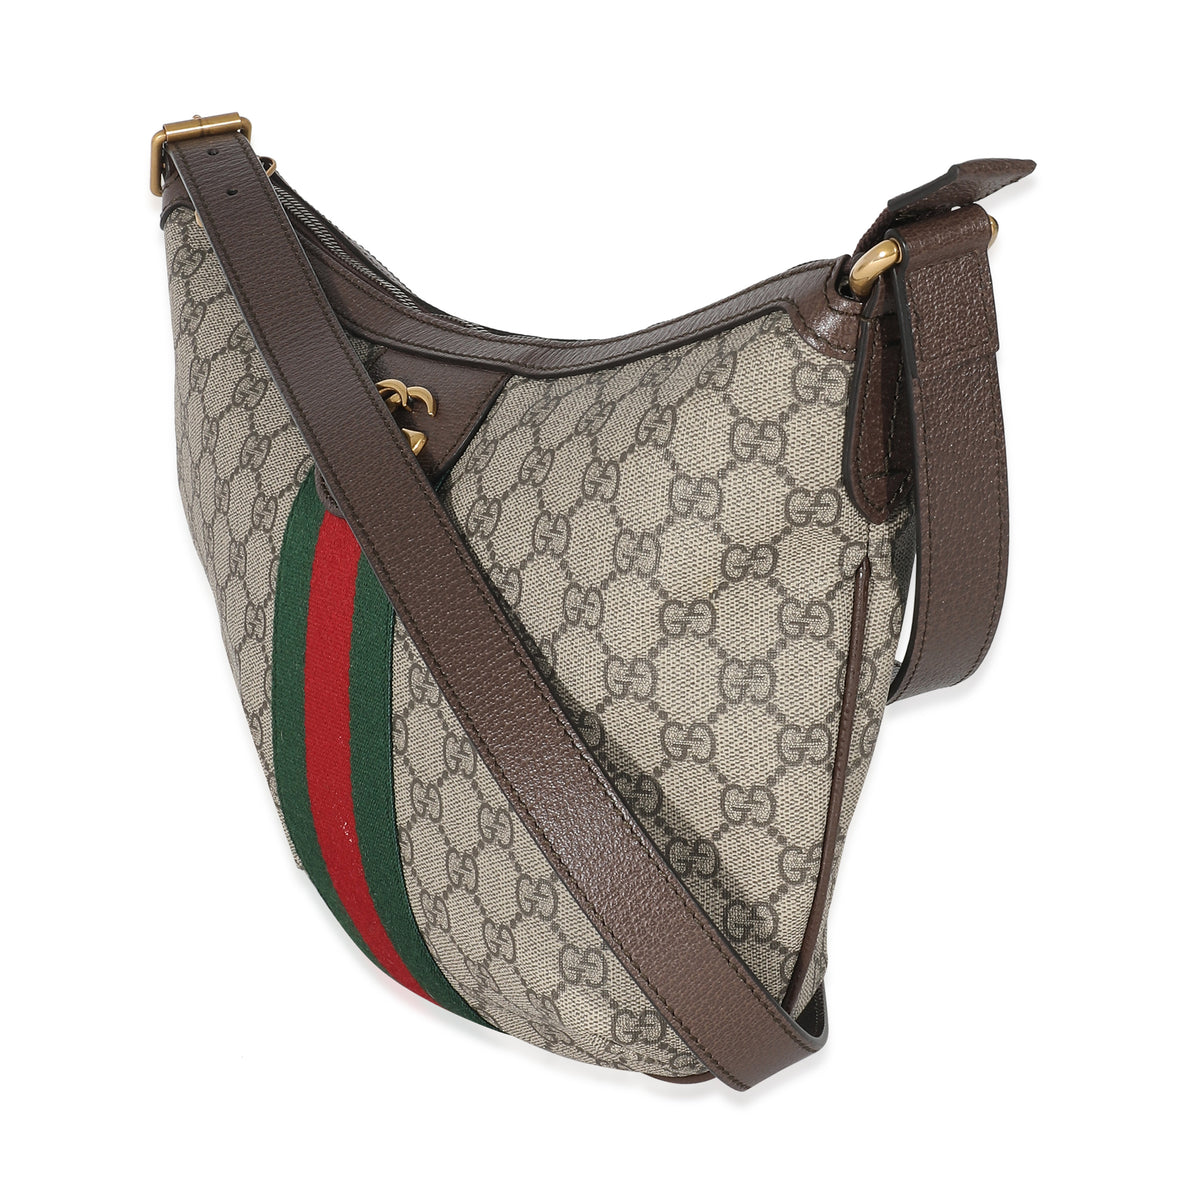 Gucci Ophidia Small Canvas Shoulder Bag